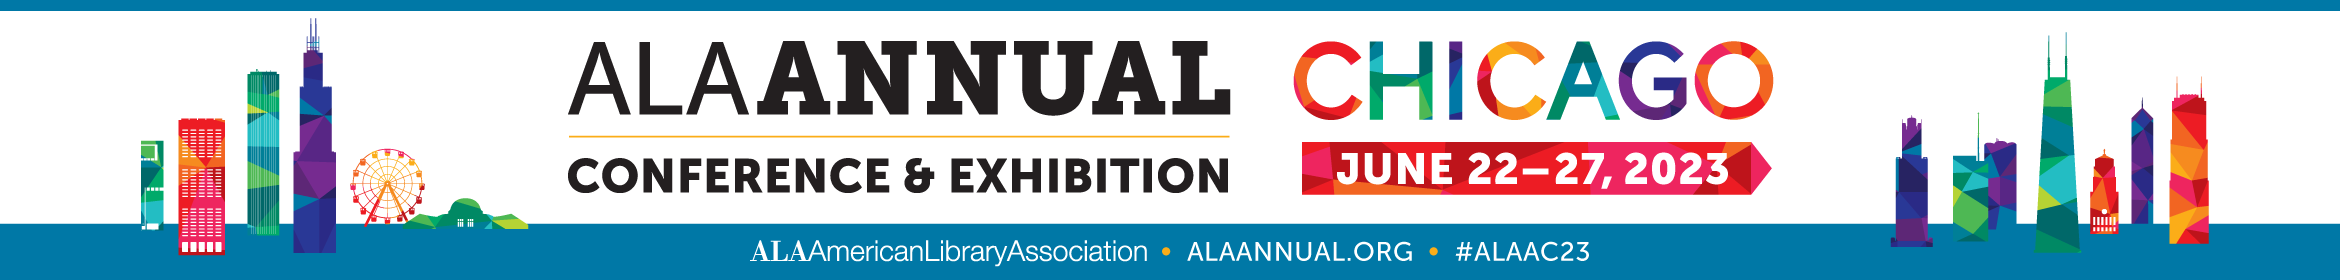 2023 ALA Annual Conference Main banner